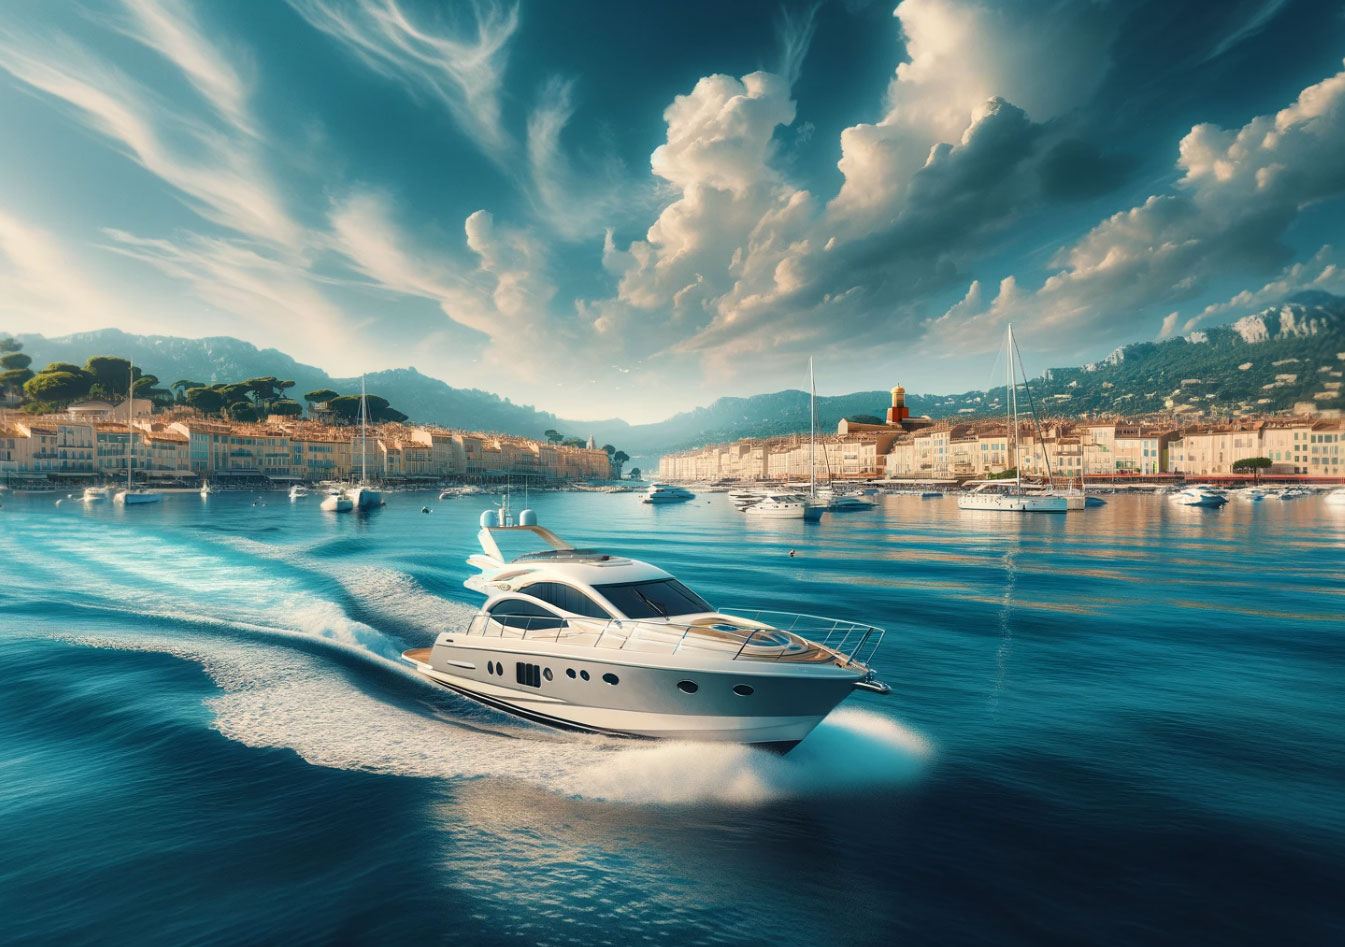 Boat Rental in Saint-Tropez as a Business: An Insider’s Perspective